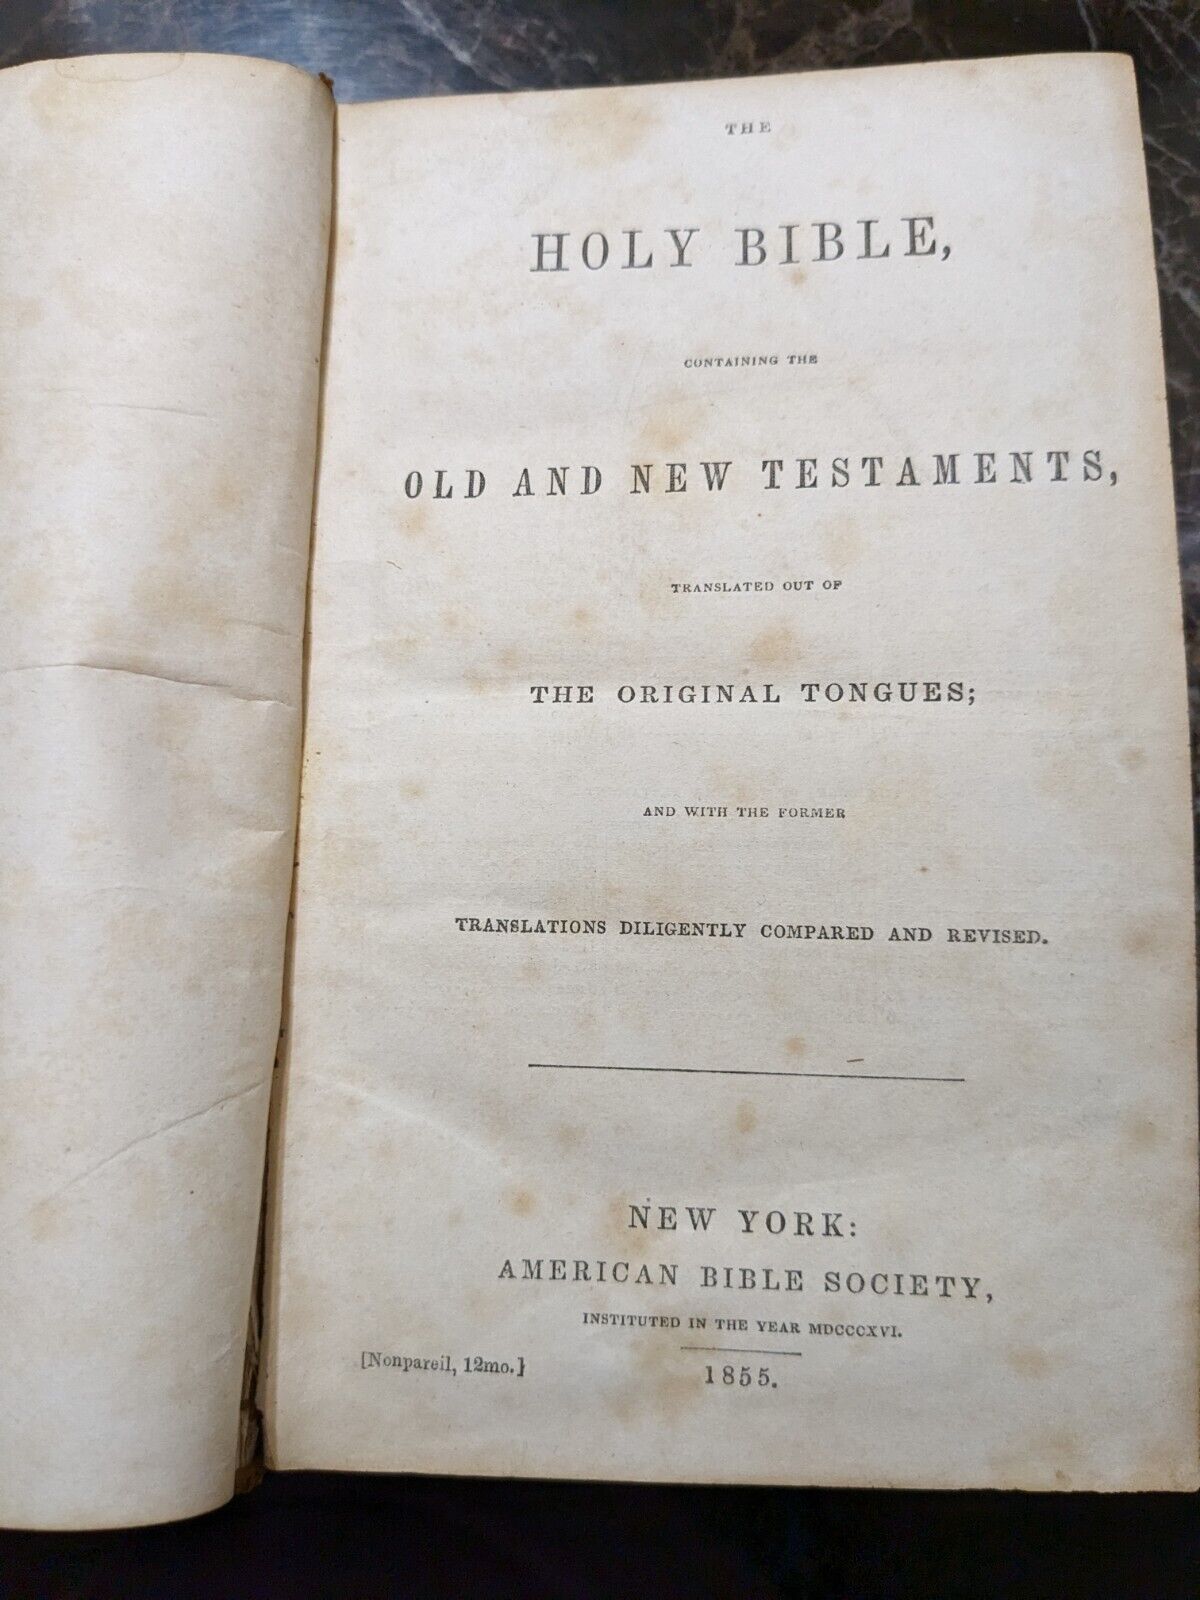 Holy Bible, Published 1855, Containing the Old and New Testaments (Hardback)